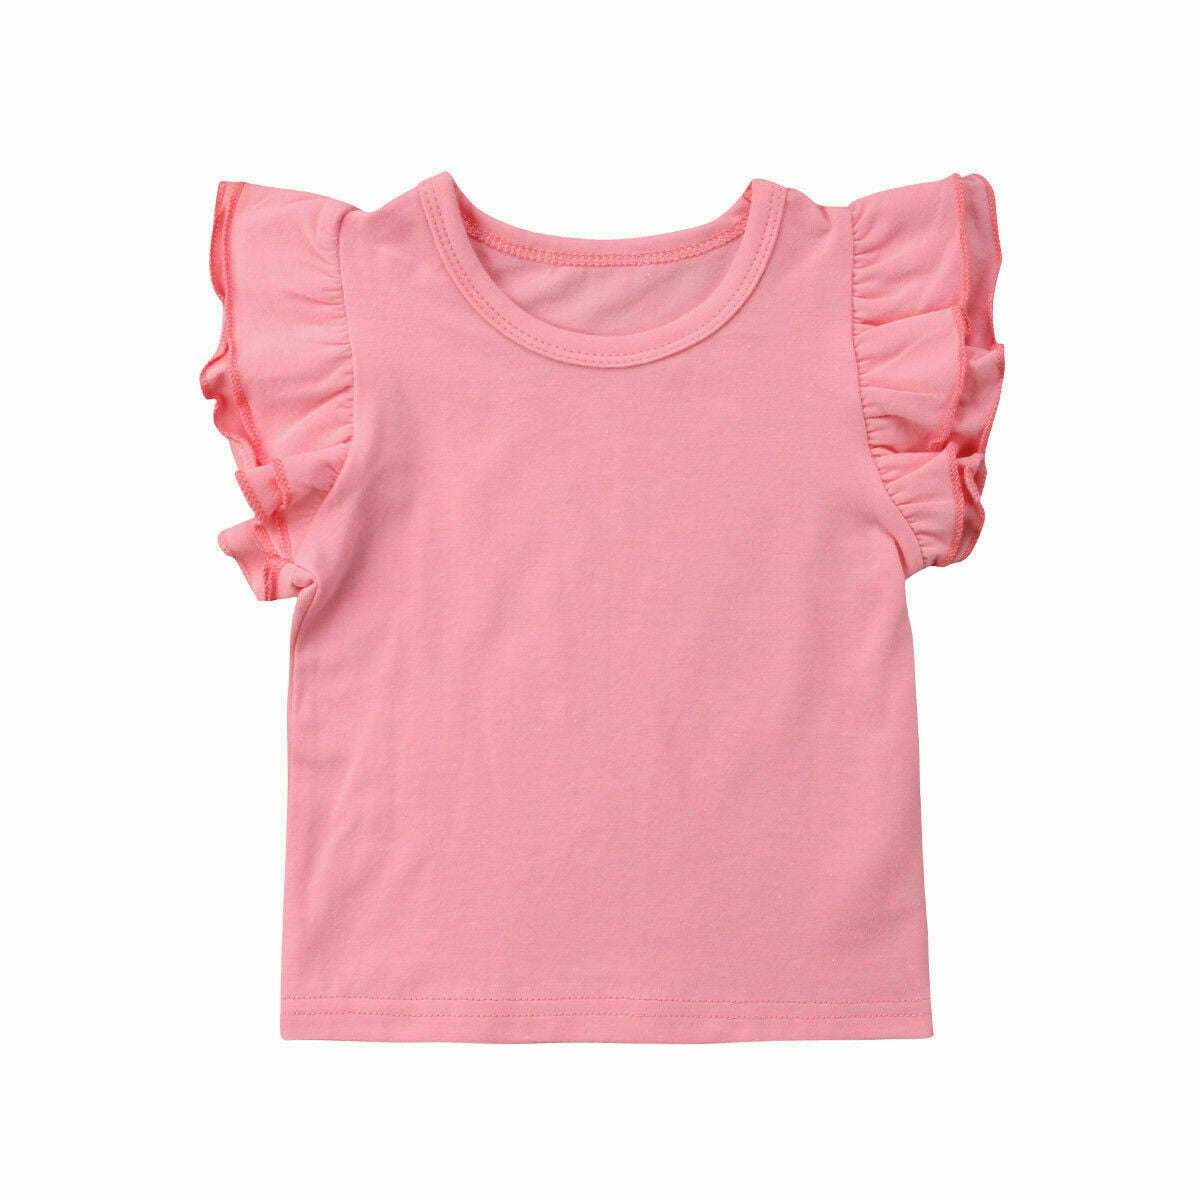 Baby Girls T-shirt Top 100% Soft Cotton Sleeveless Frilly Pink Age 6  12 Months 